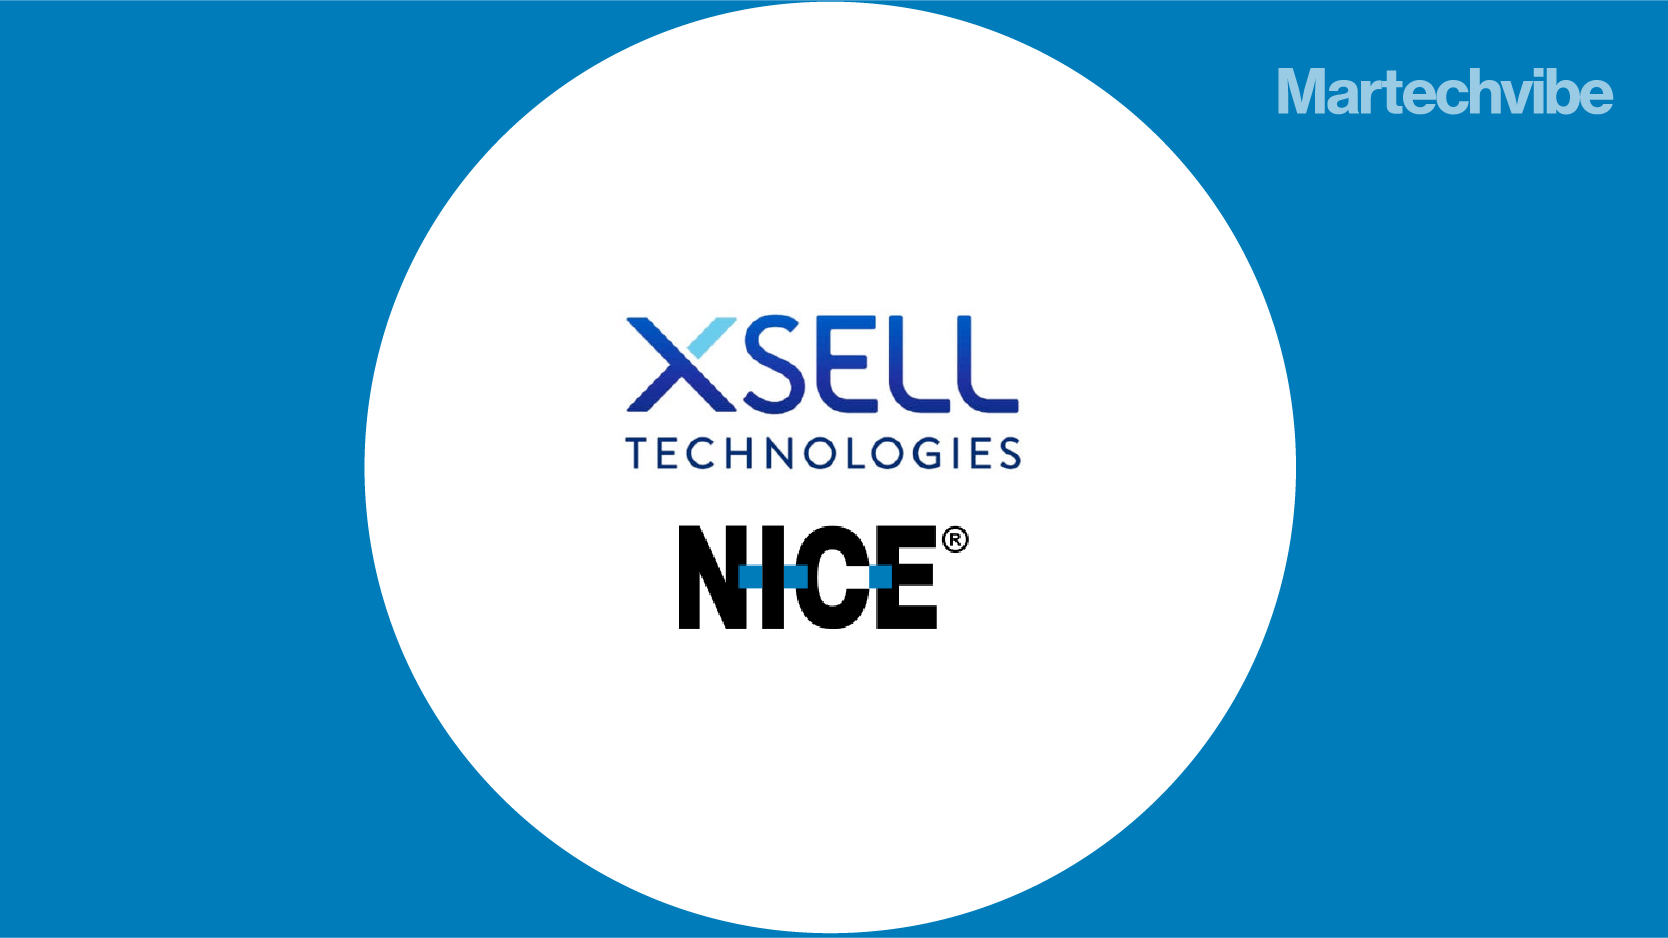 XSELL Partners With NICE